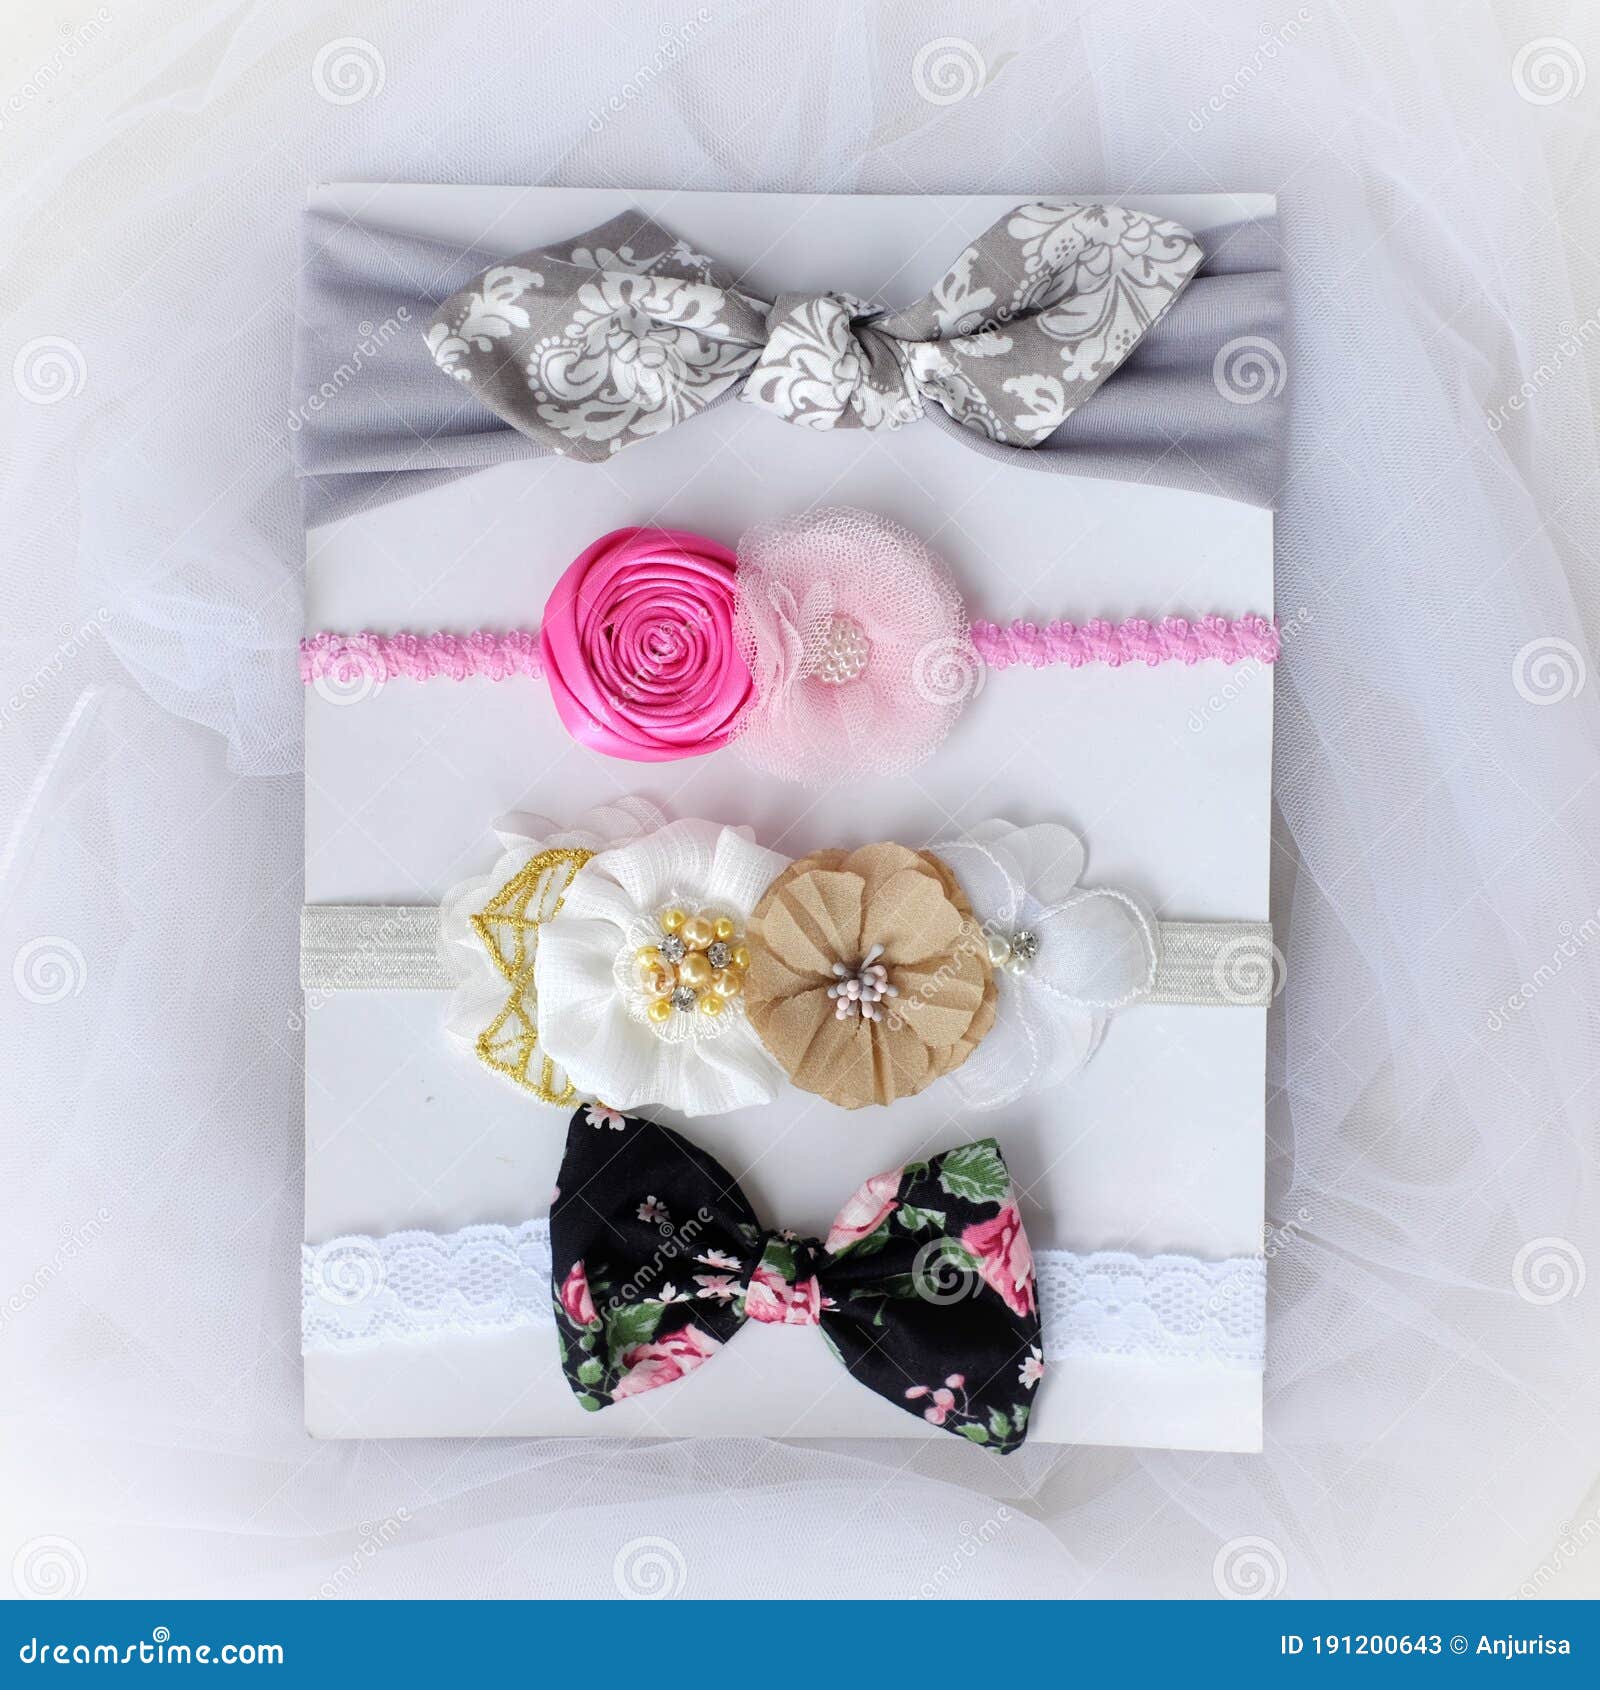 Four Pieces of Handmade Hair Accessories with Unique Design Placed on White  Tulle Fabric Stock Image - Image of craft, crafting: 191200643